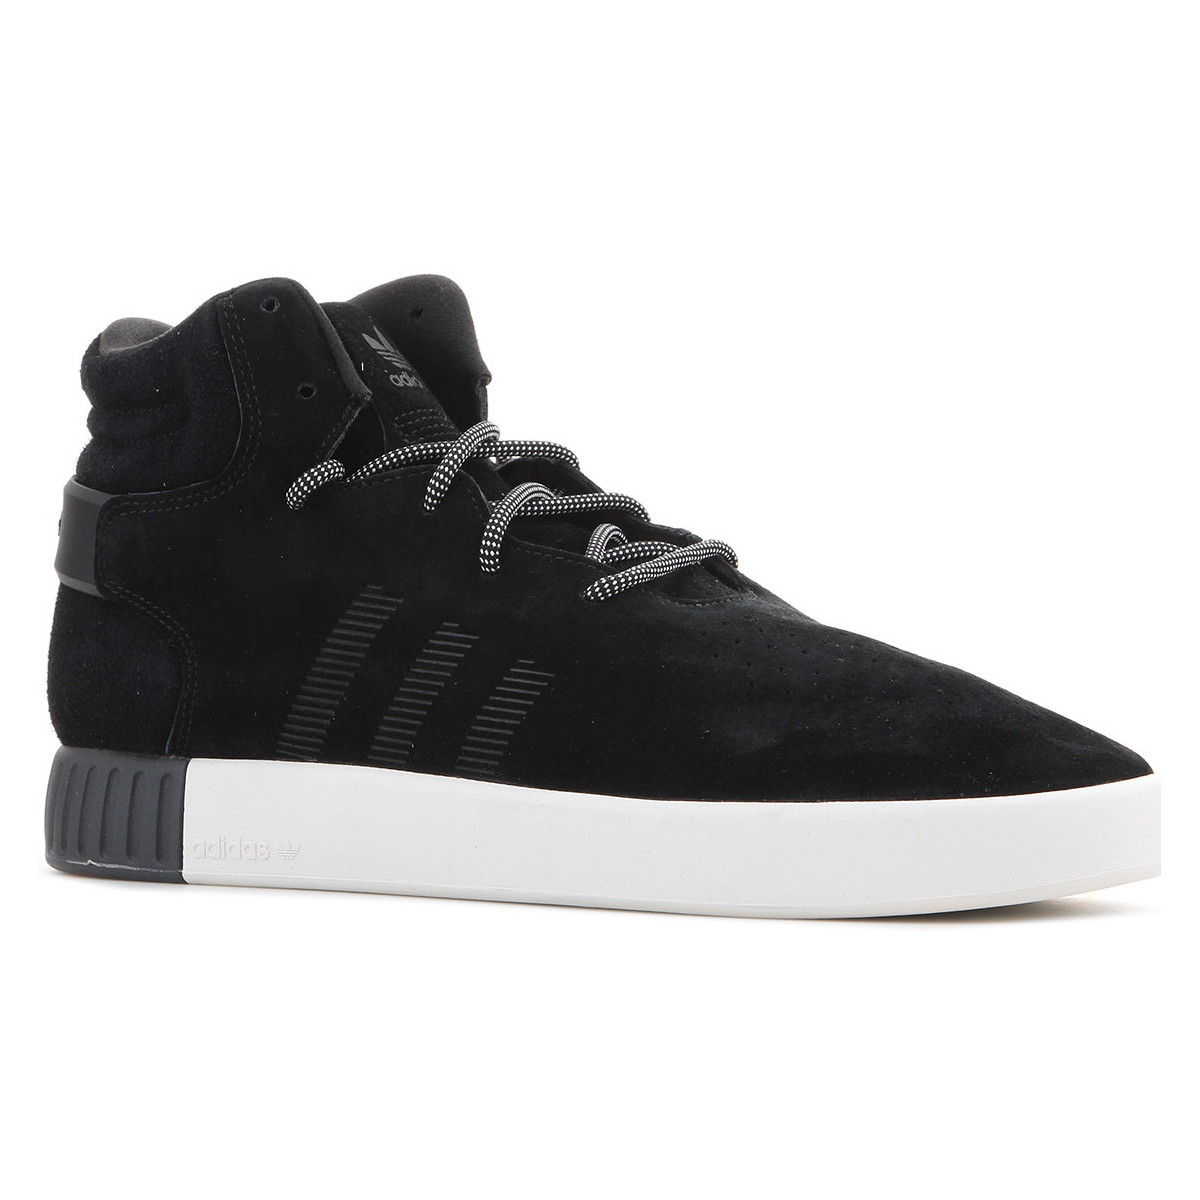 Xαμηλά Sneakers adidas Adidas Tubular Invader S80243